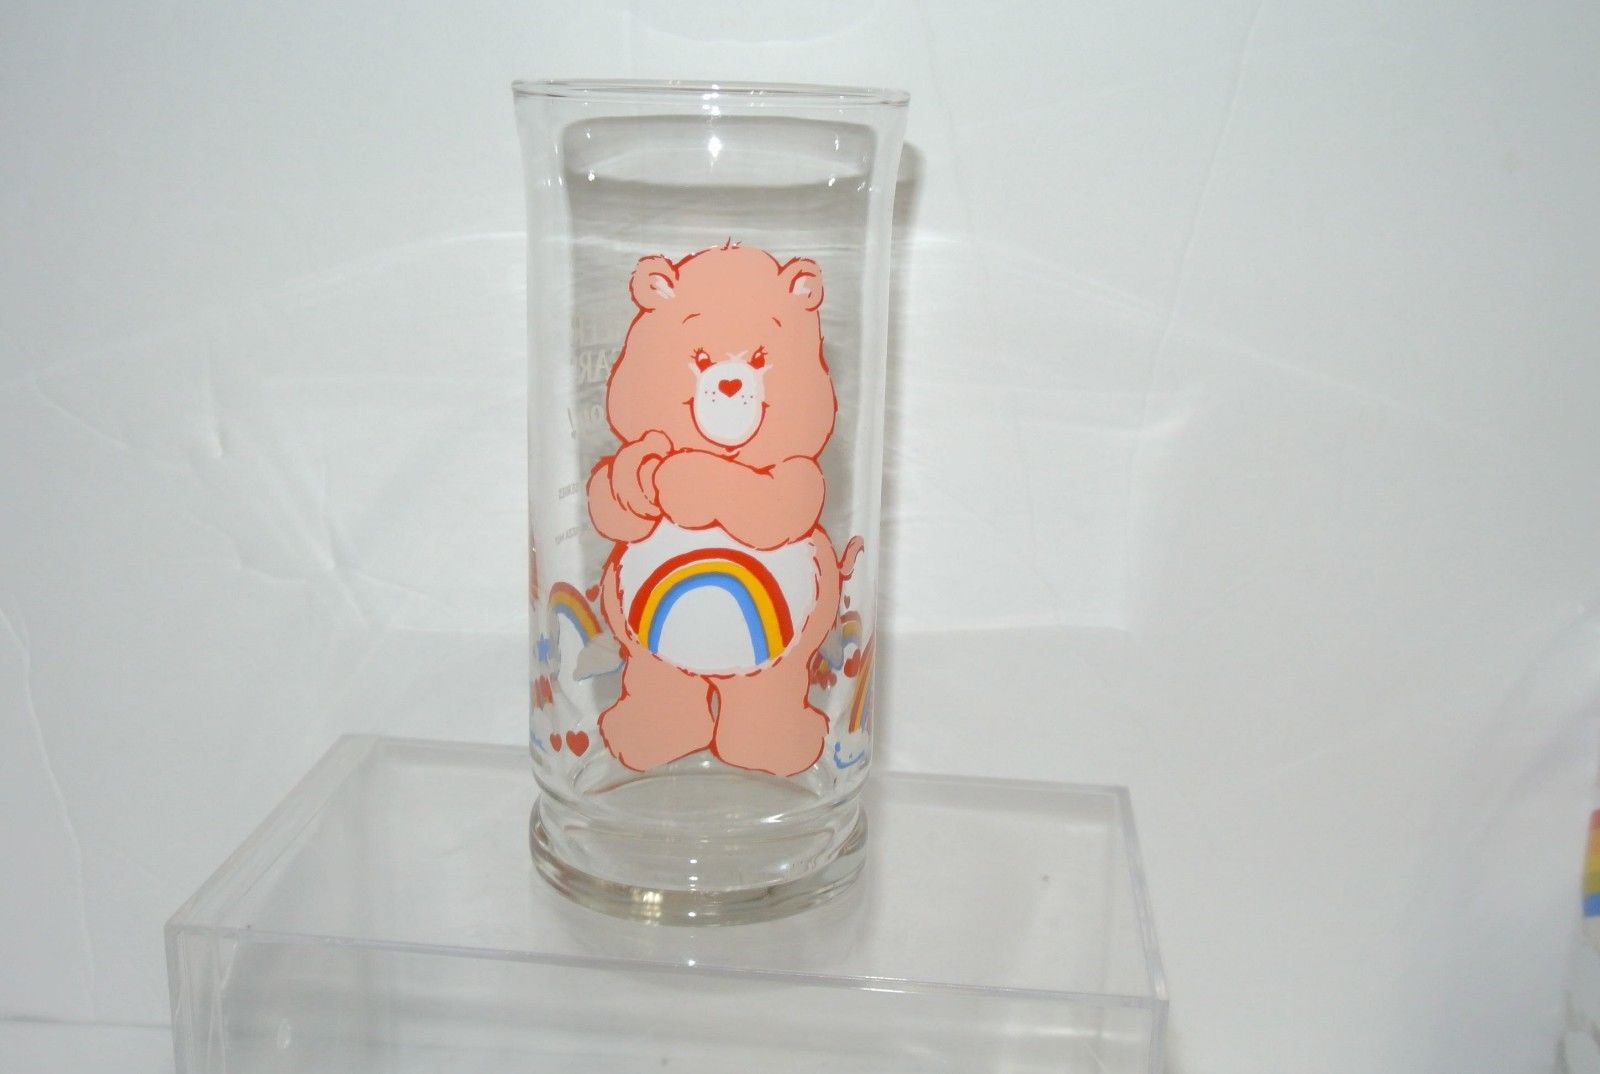 CARE BEARS - CHEER BEAR Glass Tumbler Pizza Hut limited Collector's Vintage 1983